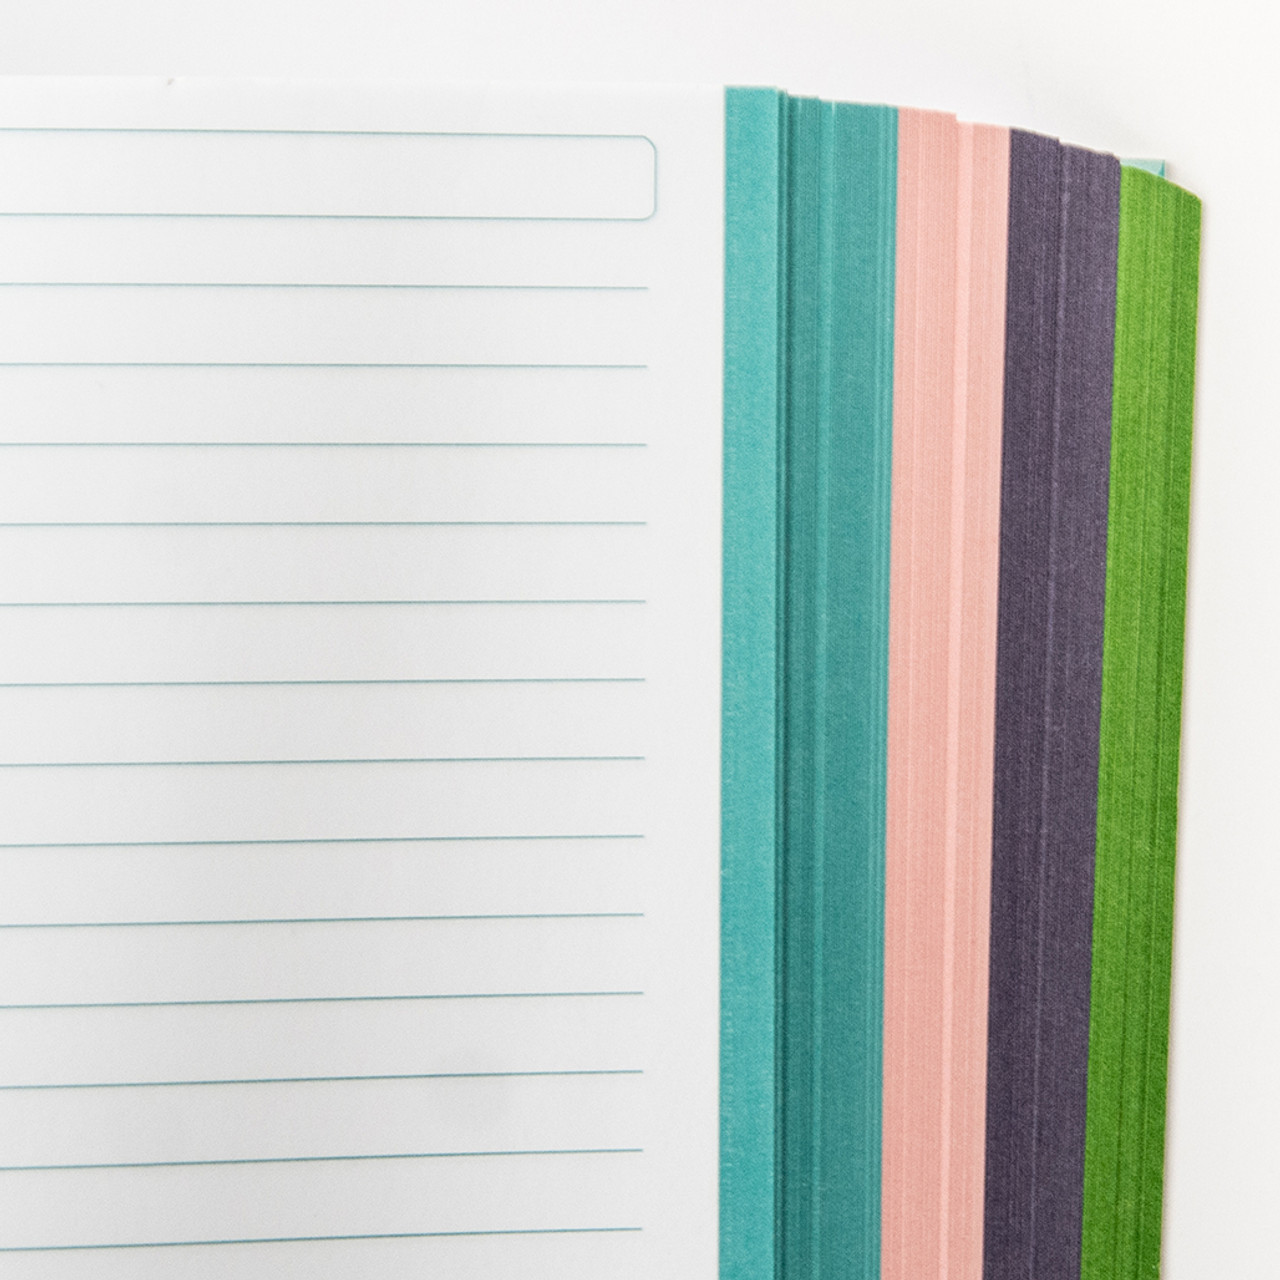 Super Thick A4 Notebook with Color Edge, 400 Pages Lined Paper